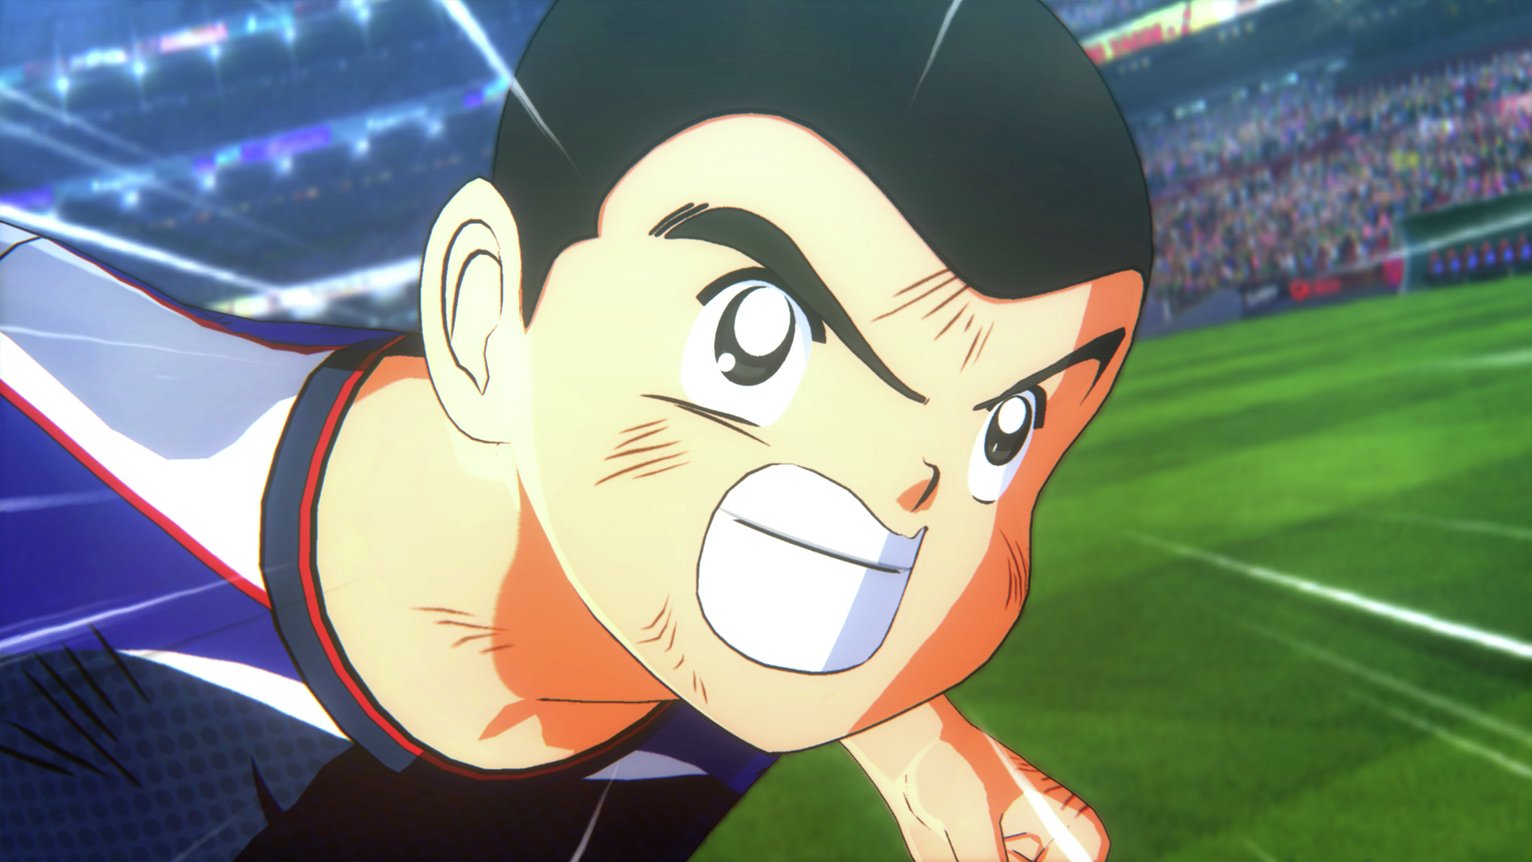 Captain Tsubasa: Rise of New Champions PS4 Game Review